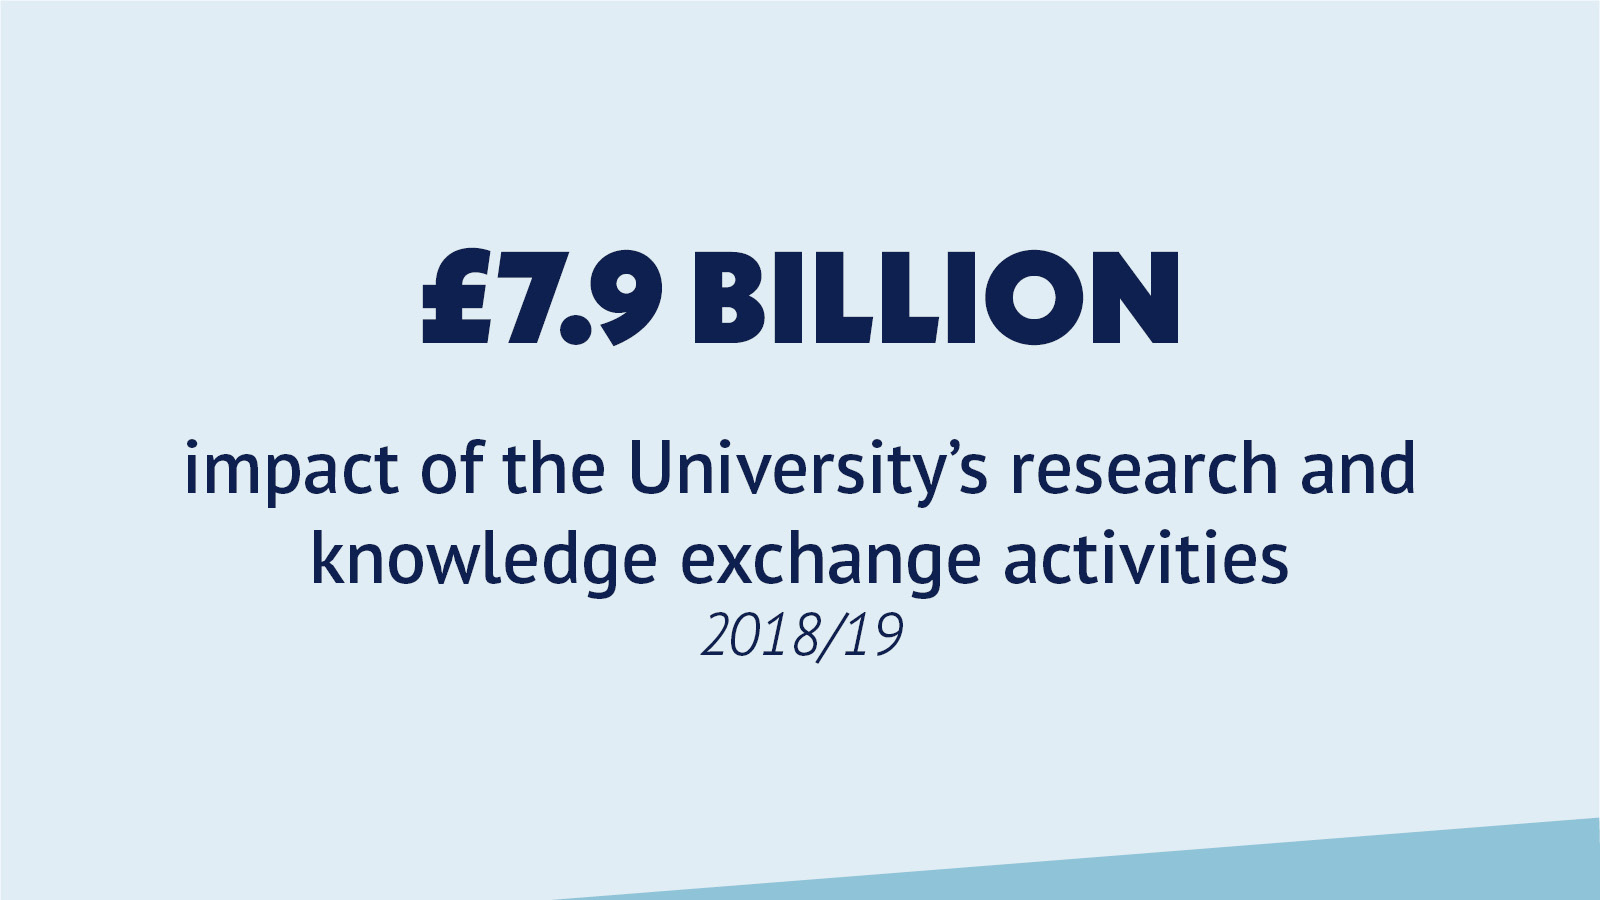 £7.9 billion impact of the University's research and knowledge exchange activities 2018/19